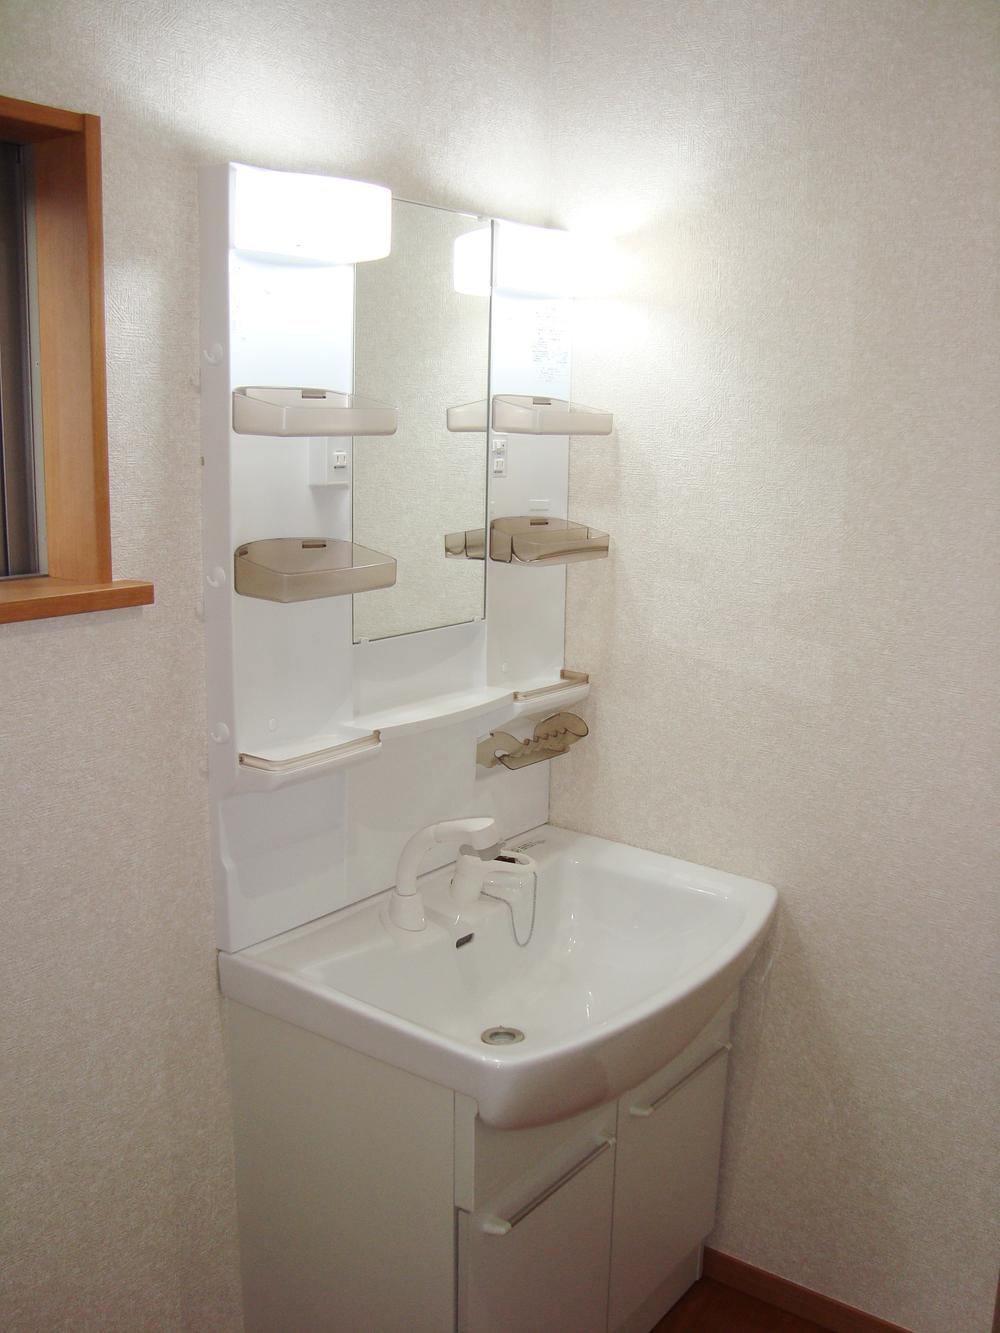 Wash basin, toilet. With hand shower